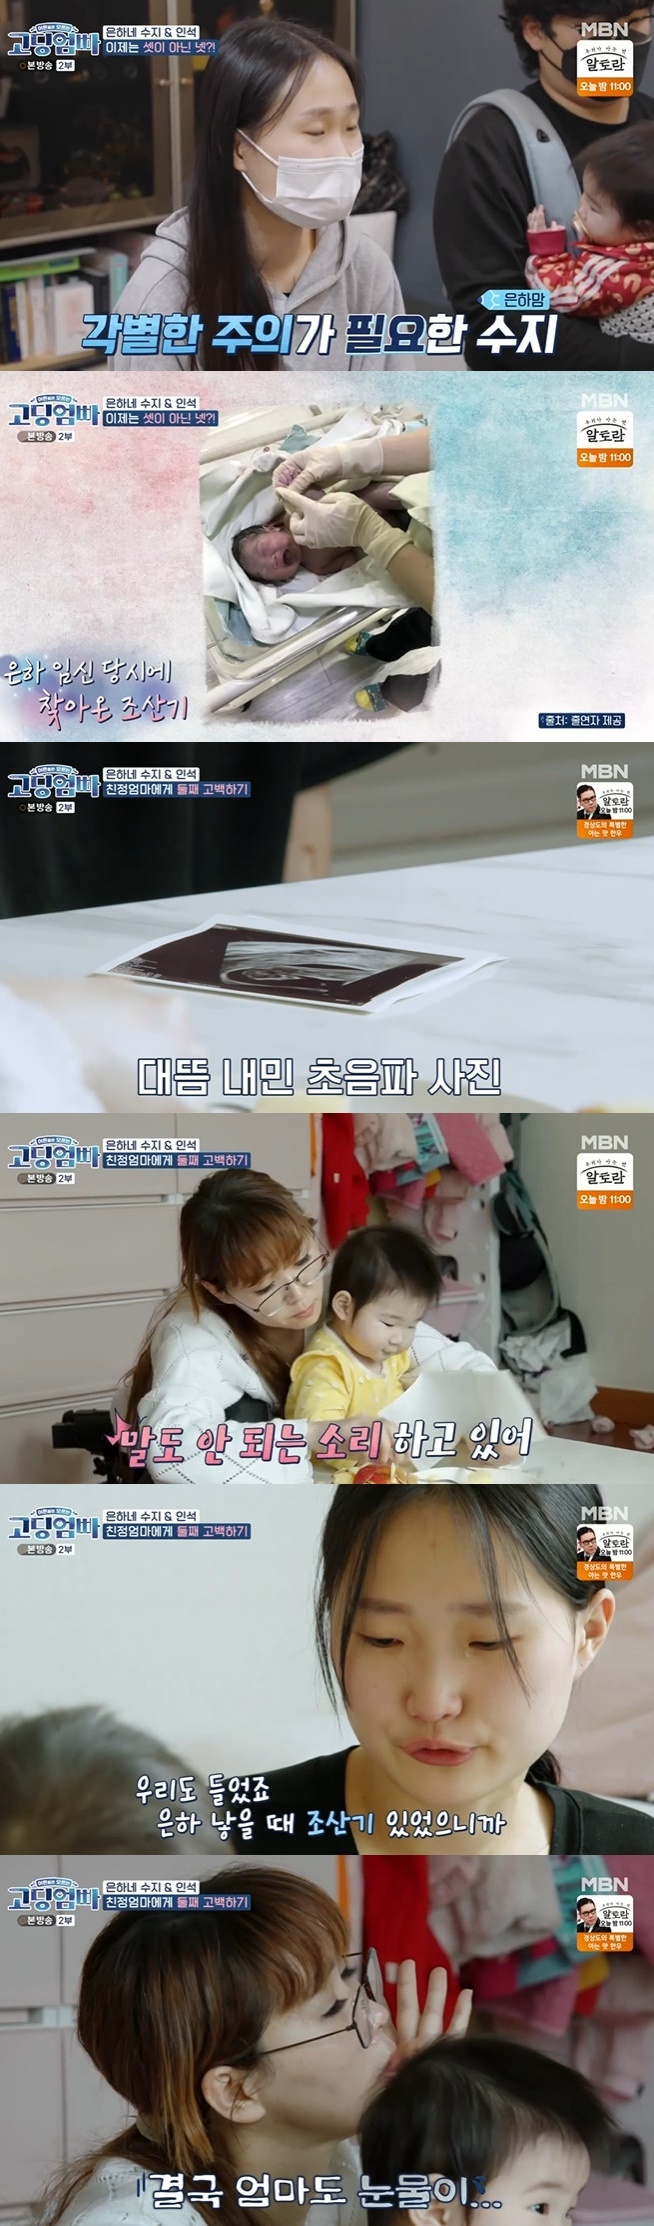 High school mom dad 18-year-old mother Jung Soo-ji showed tears in front of her mothers second pregnancy with Confessions.MBN s high school mom dad, which was broadcast on April 24, appeared as a new high school mother, 18 years old, who raised her 12-month-old daughter Eunha.Husband Kangin is working on a weekly basis, so if you do not work a day, you will be hit by your household.Nevertheless, the couple said that they should rest the next day, and wondered if there was a special schedule.The next day, Jung Su-jis mother visited the house. When she arrived at the house, she opened the refrigerator and said, Why did not you eat apple juice? Did not you tell me to eat Eunha?Then, he checked the cleaning condition and said, What if Eunha picks it up?Behind them, the Kangin-seoks were busy watching, and even in front of their mother-in-laws food, which was set to break the upper legs, the water purifier could not shake the tension.Then Kangin left for a while and returned and handed an ultrasound photo to his mother-in-law. My mother-in-law was shocked by shaking her hand, saying, What is this?In the interview, Jung Soo-ji said, I was pregnant and I was careful.The second and second parents who suddenly appeared said that they should go late, so they can not tell. As it turns out, the water purification plant weighed 43kg at the time of the first pregnancy, and now it is only 40kg, and the first time it is premature, so the second time needs special attention.The mother of the mother said, My mother told me about my sister, but the second is not.Youre still hard, she said, also blushing. My heart hurts so much. Honestly. Its hard.I know the suffering of the year-end childcare, so I did not want to go the same way as me, but I should be afraid. Nevertheless, my mother, who accepted the second pregnancy news, advised me, You are an adult and have the right to choose, so do not think about it, you think about your body, and Eunha father should earn diligently.You guys are one shot, the second one, he added, adding a joke.